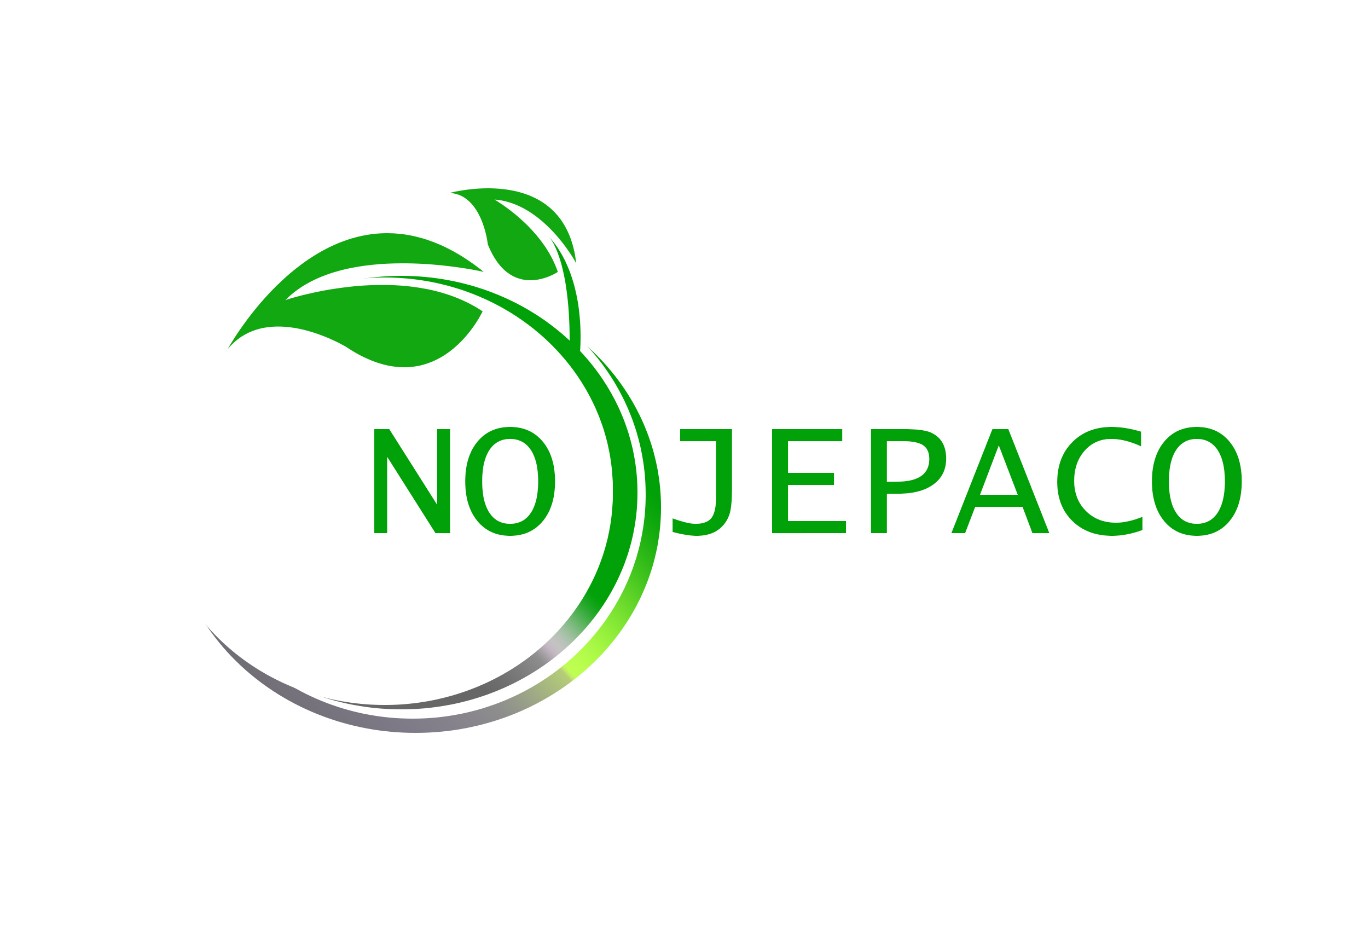 Story of No-Jepaco: Helping Those in Need 